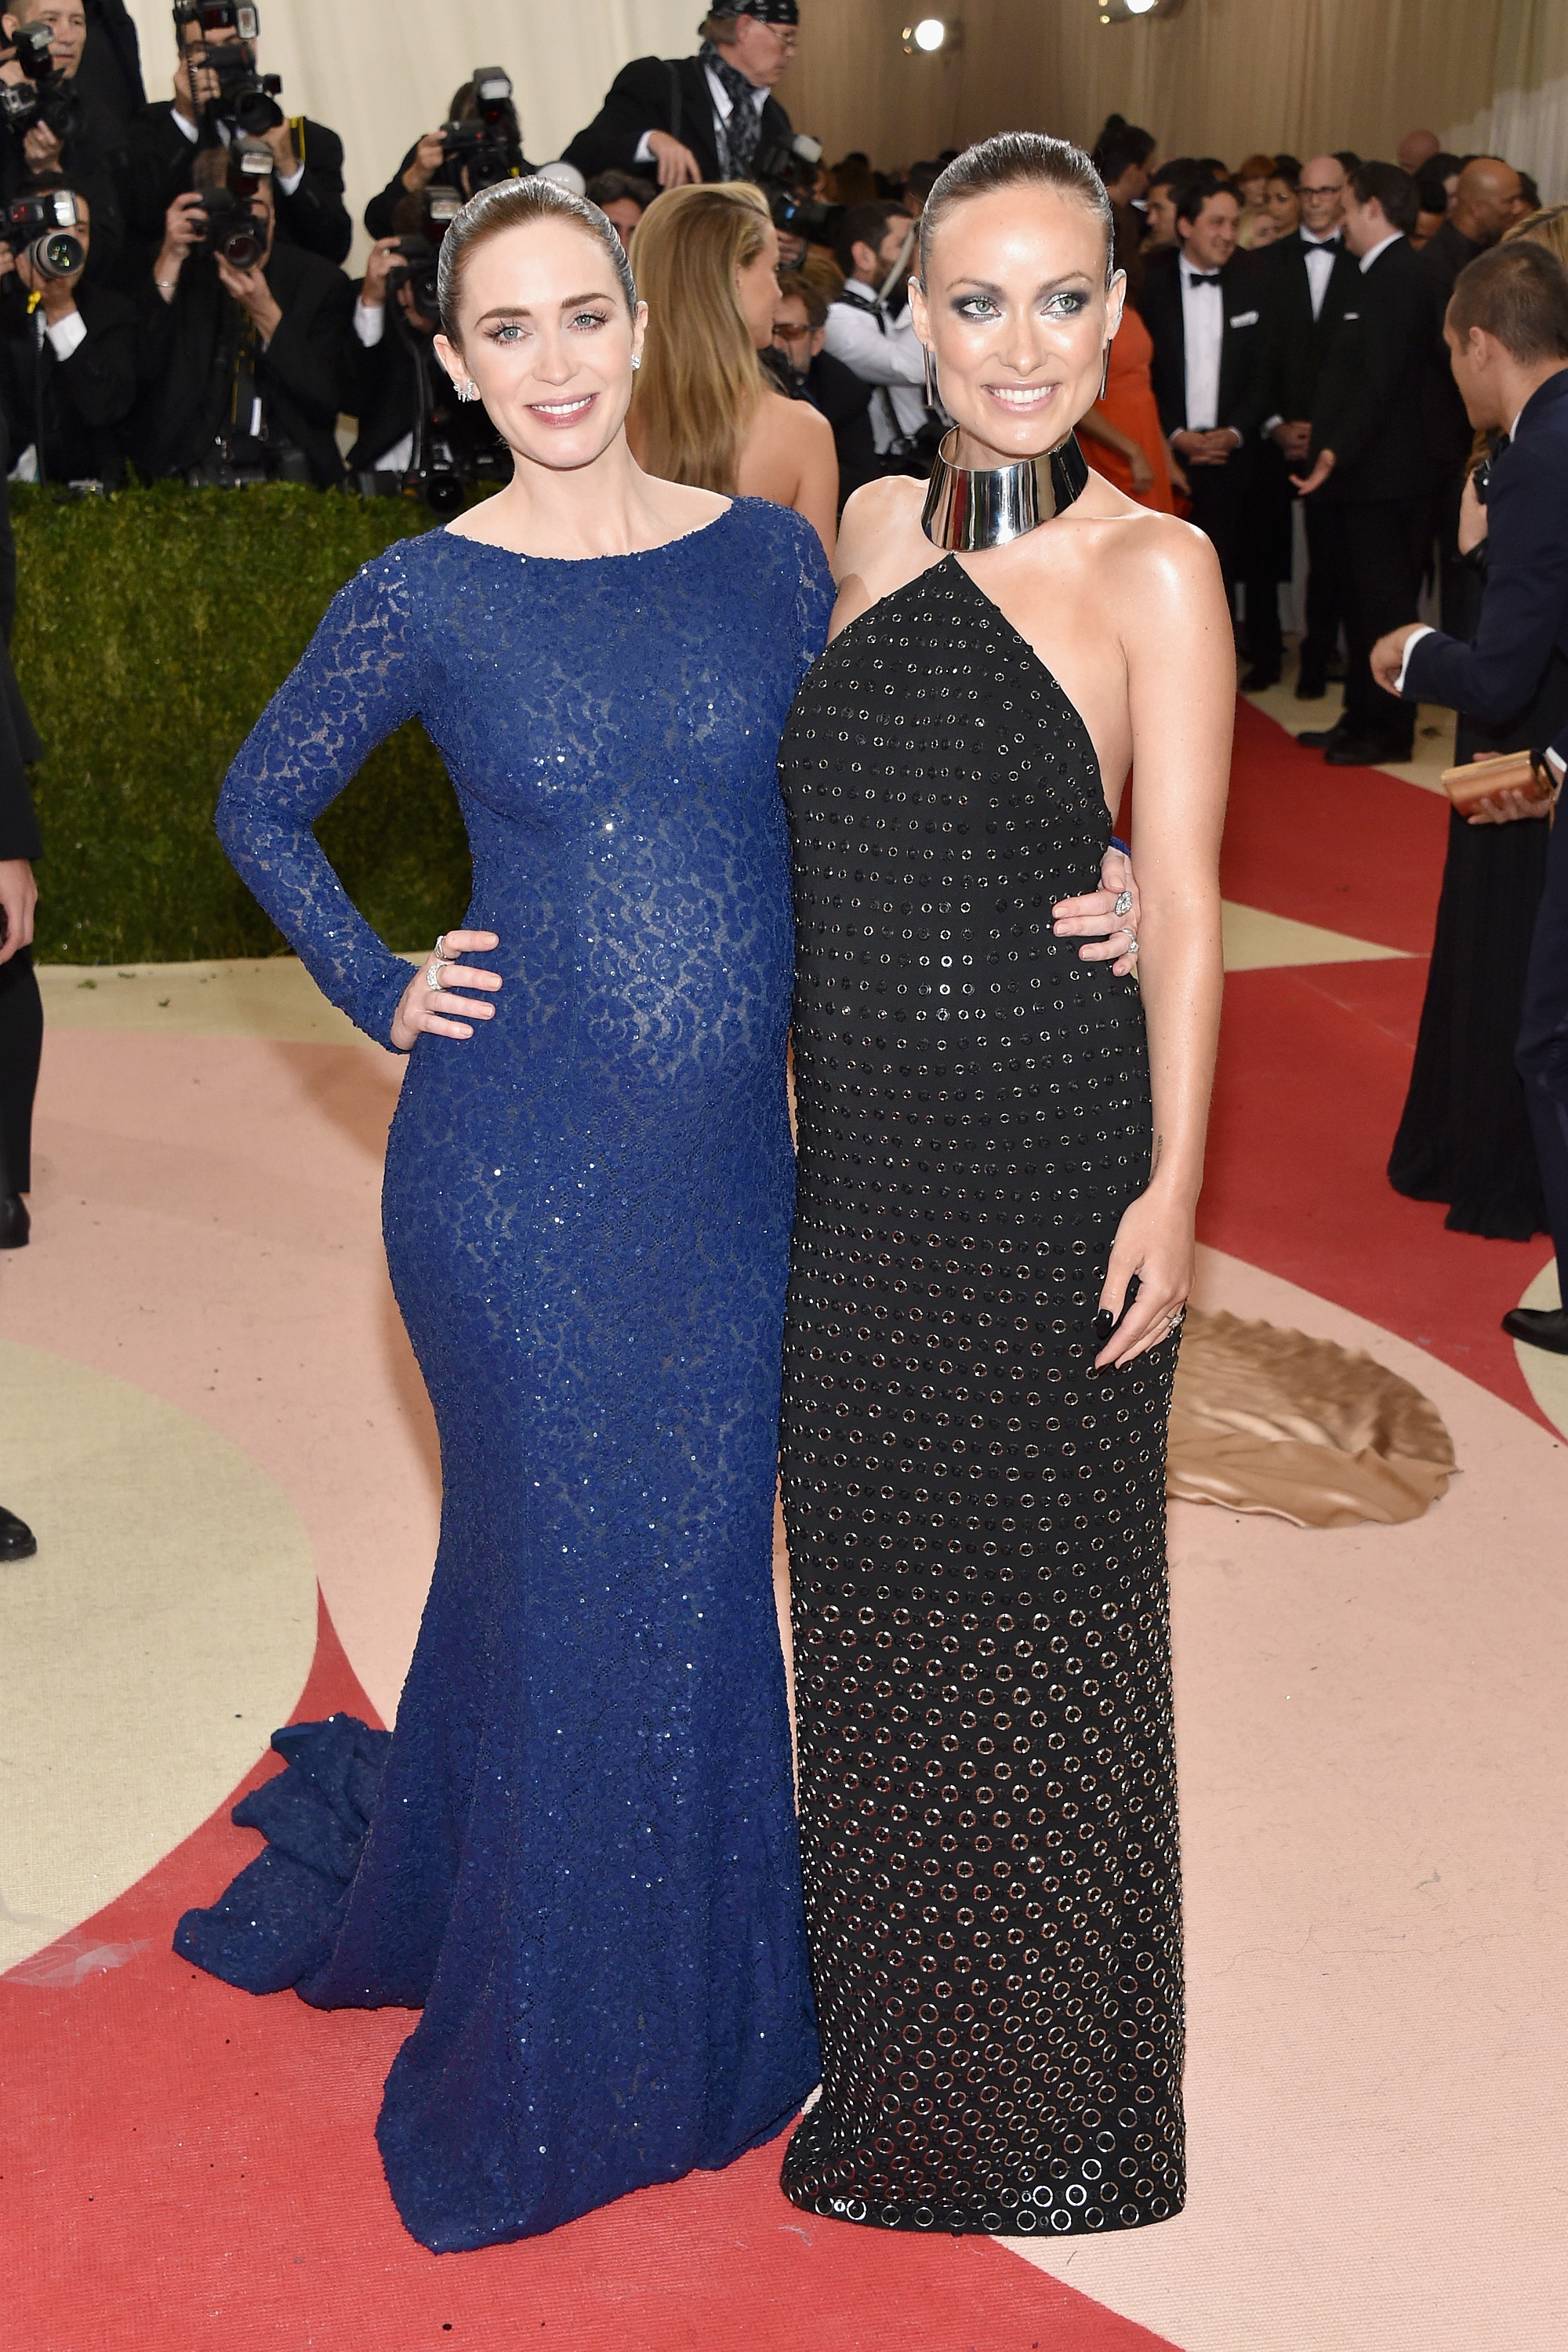 Emily Blunt and Olivia Wilde attend  Manus x Machina: Fashion In An Age Of Technology  Costume Institute Gala at Metropolitan Museum of Art on May 2, 2016 in New York City.